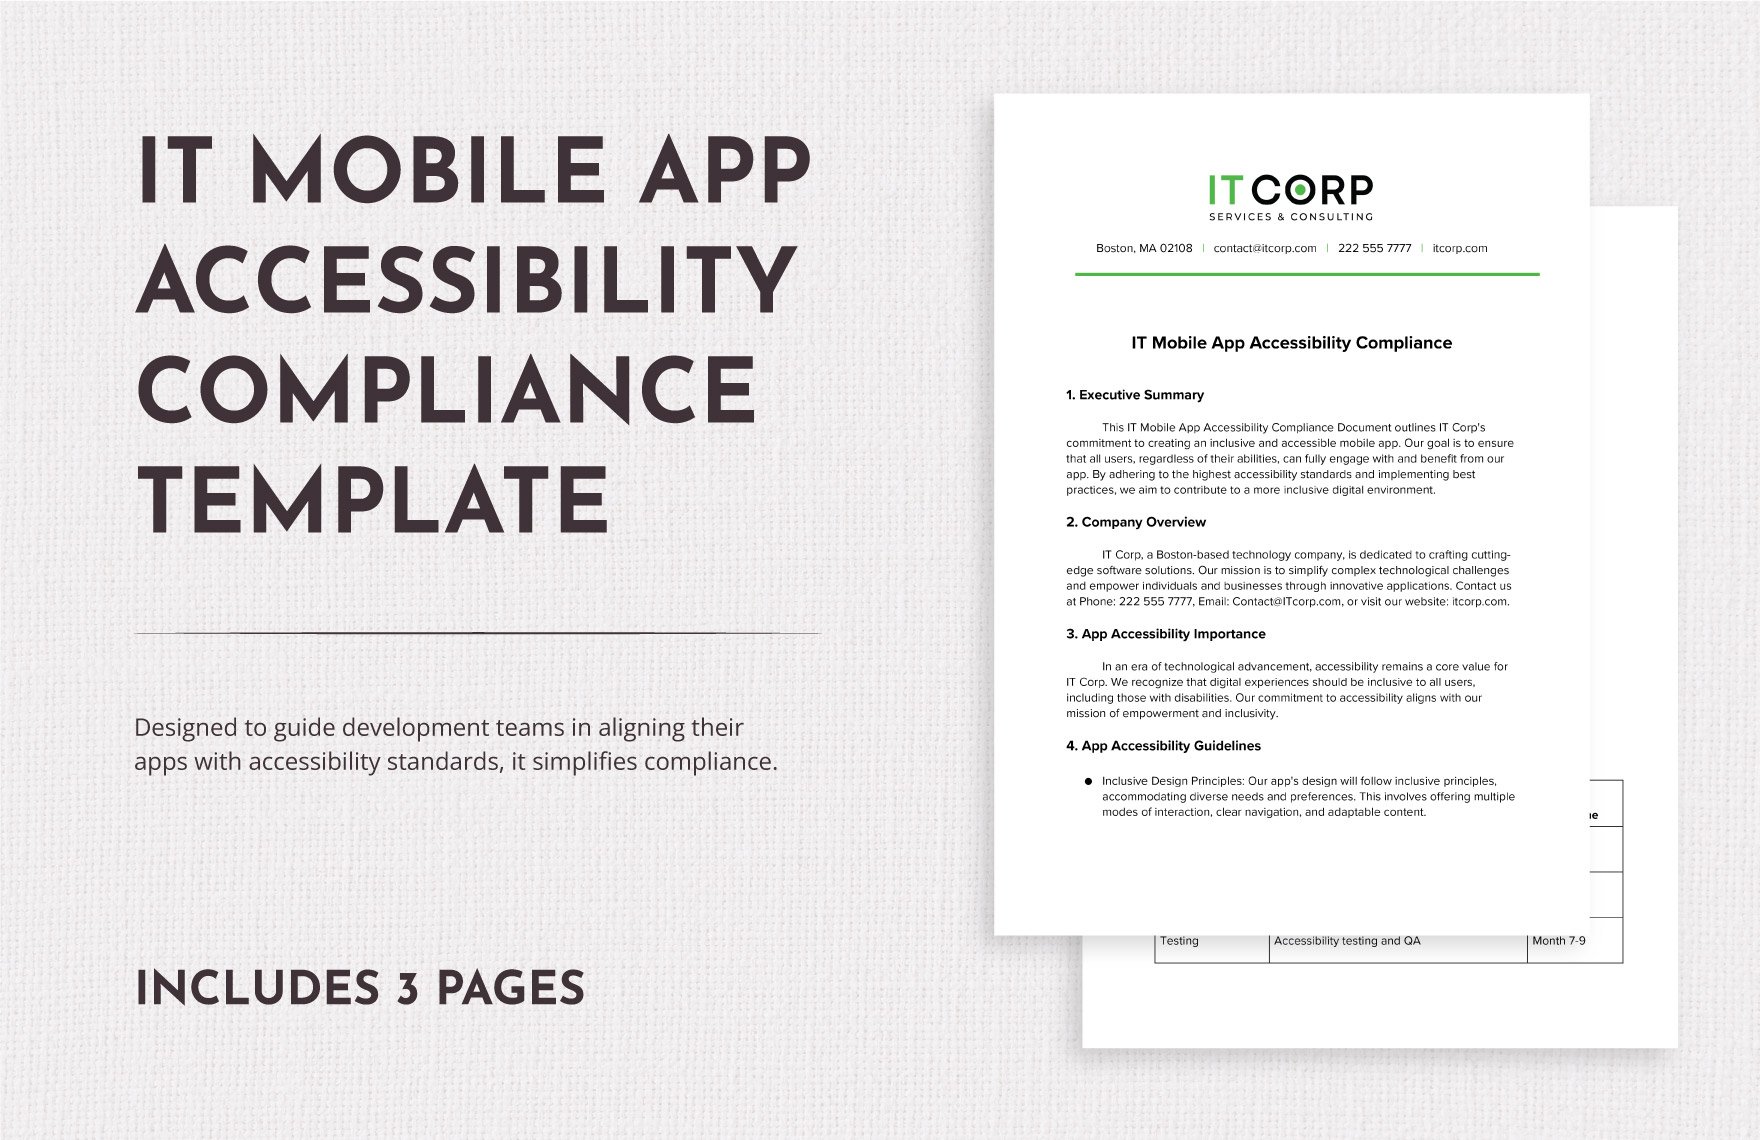 IT Mobile App Accessibility Compliance Template